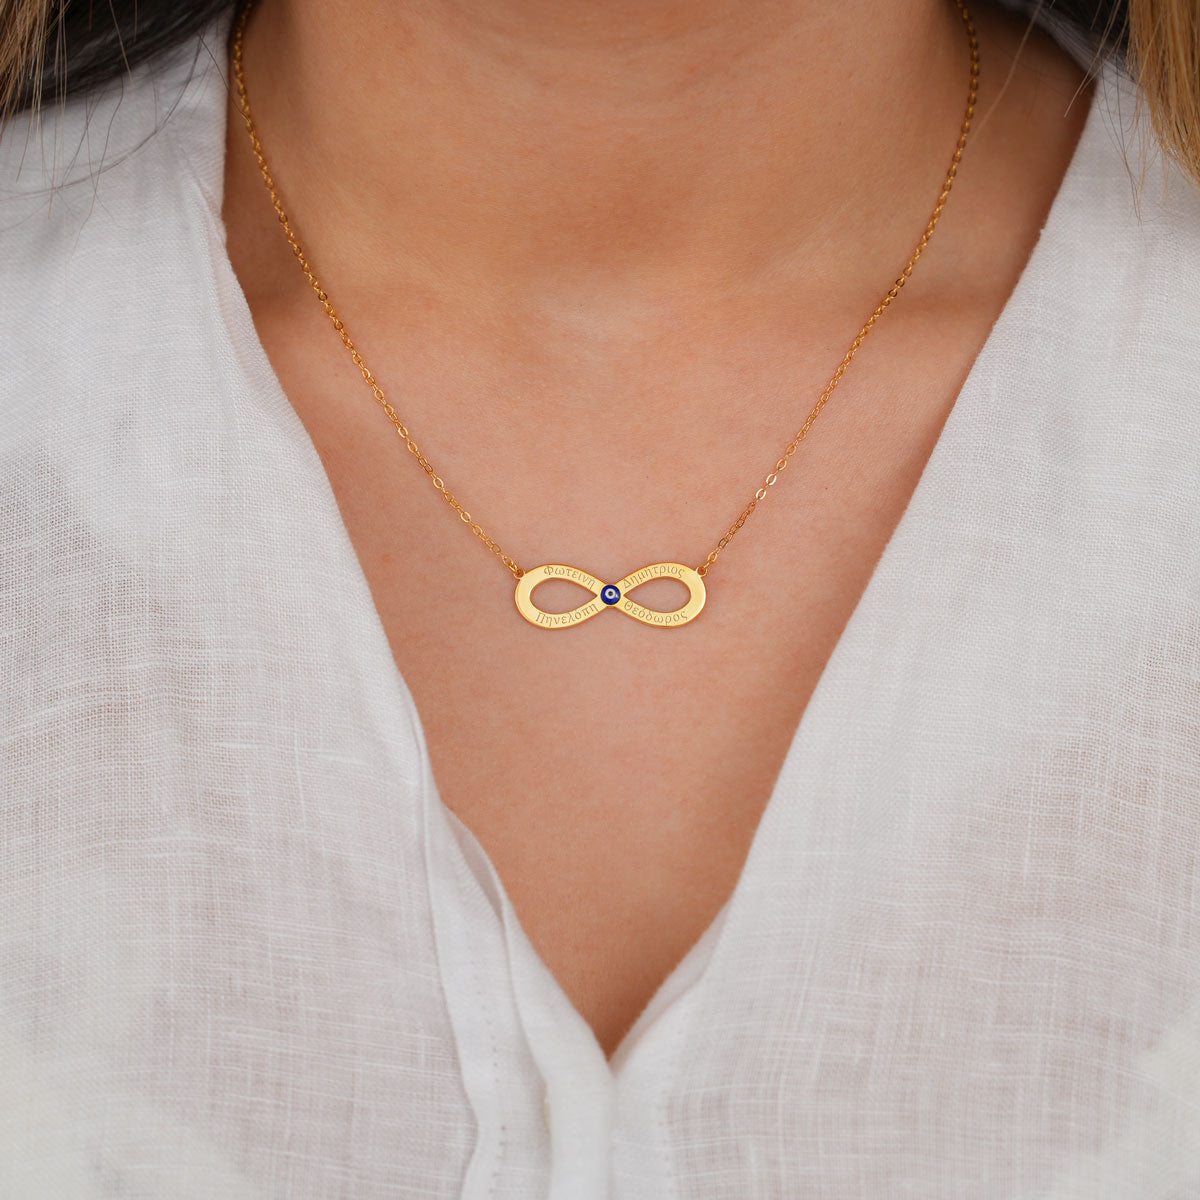 4 Greek Name Engraved Infinity Necklace With Evil Eye